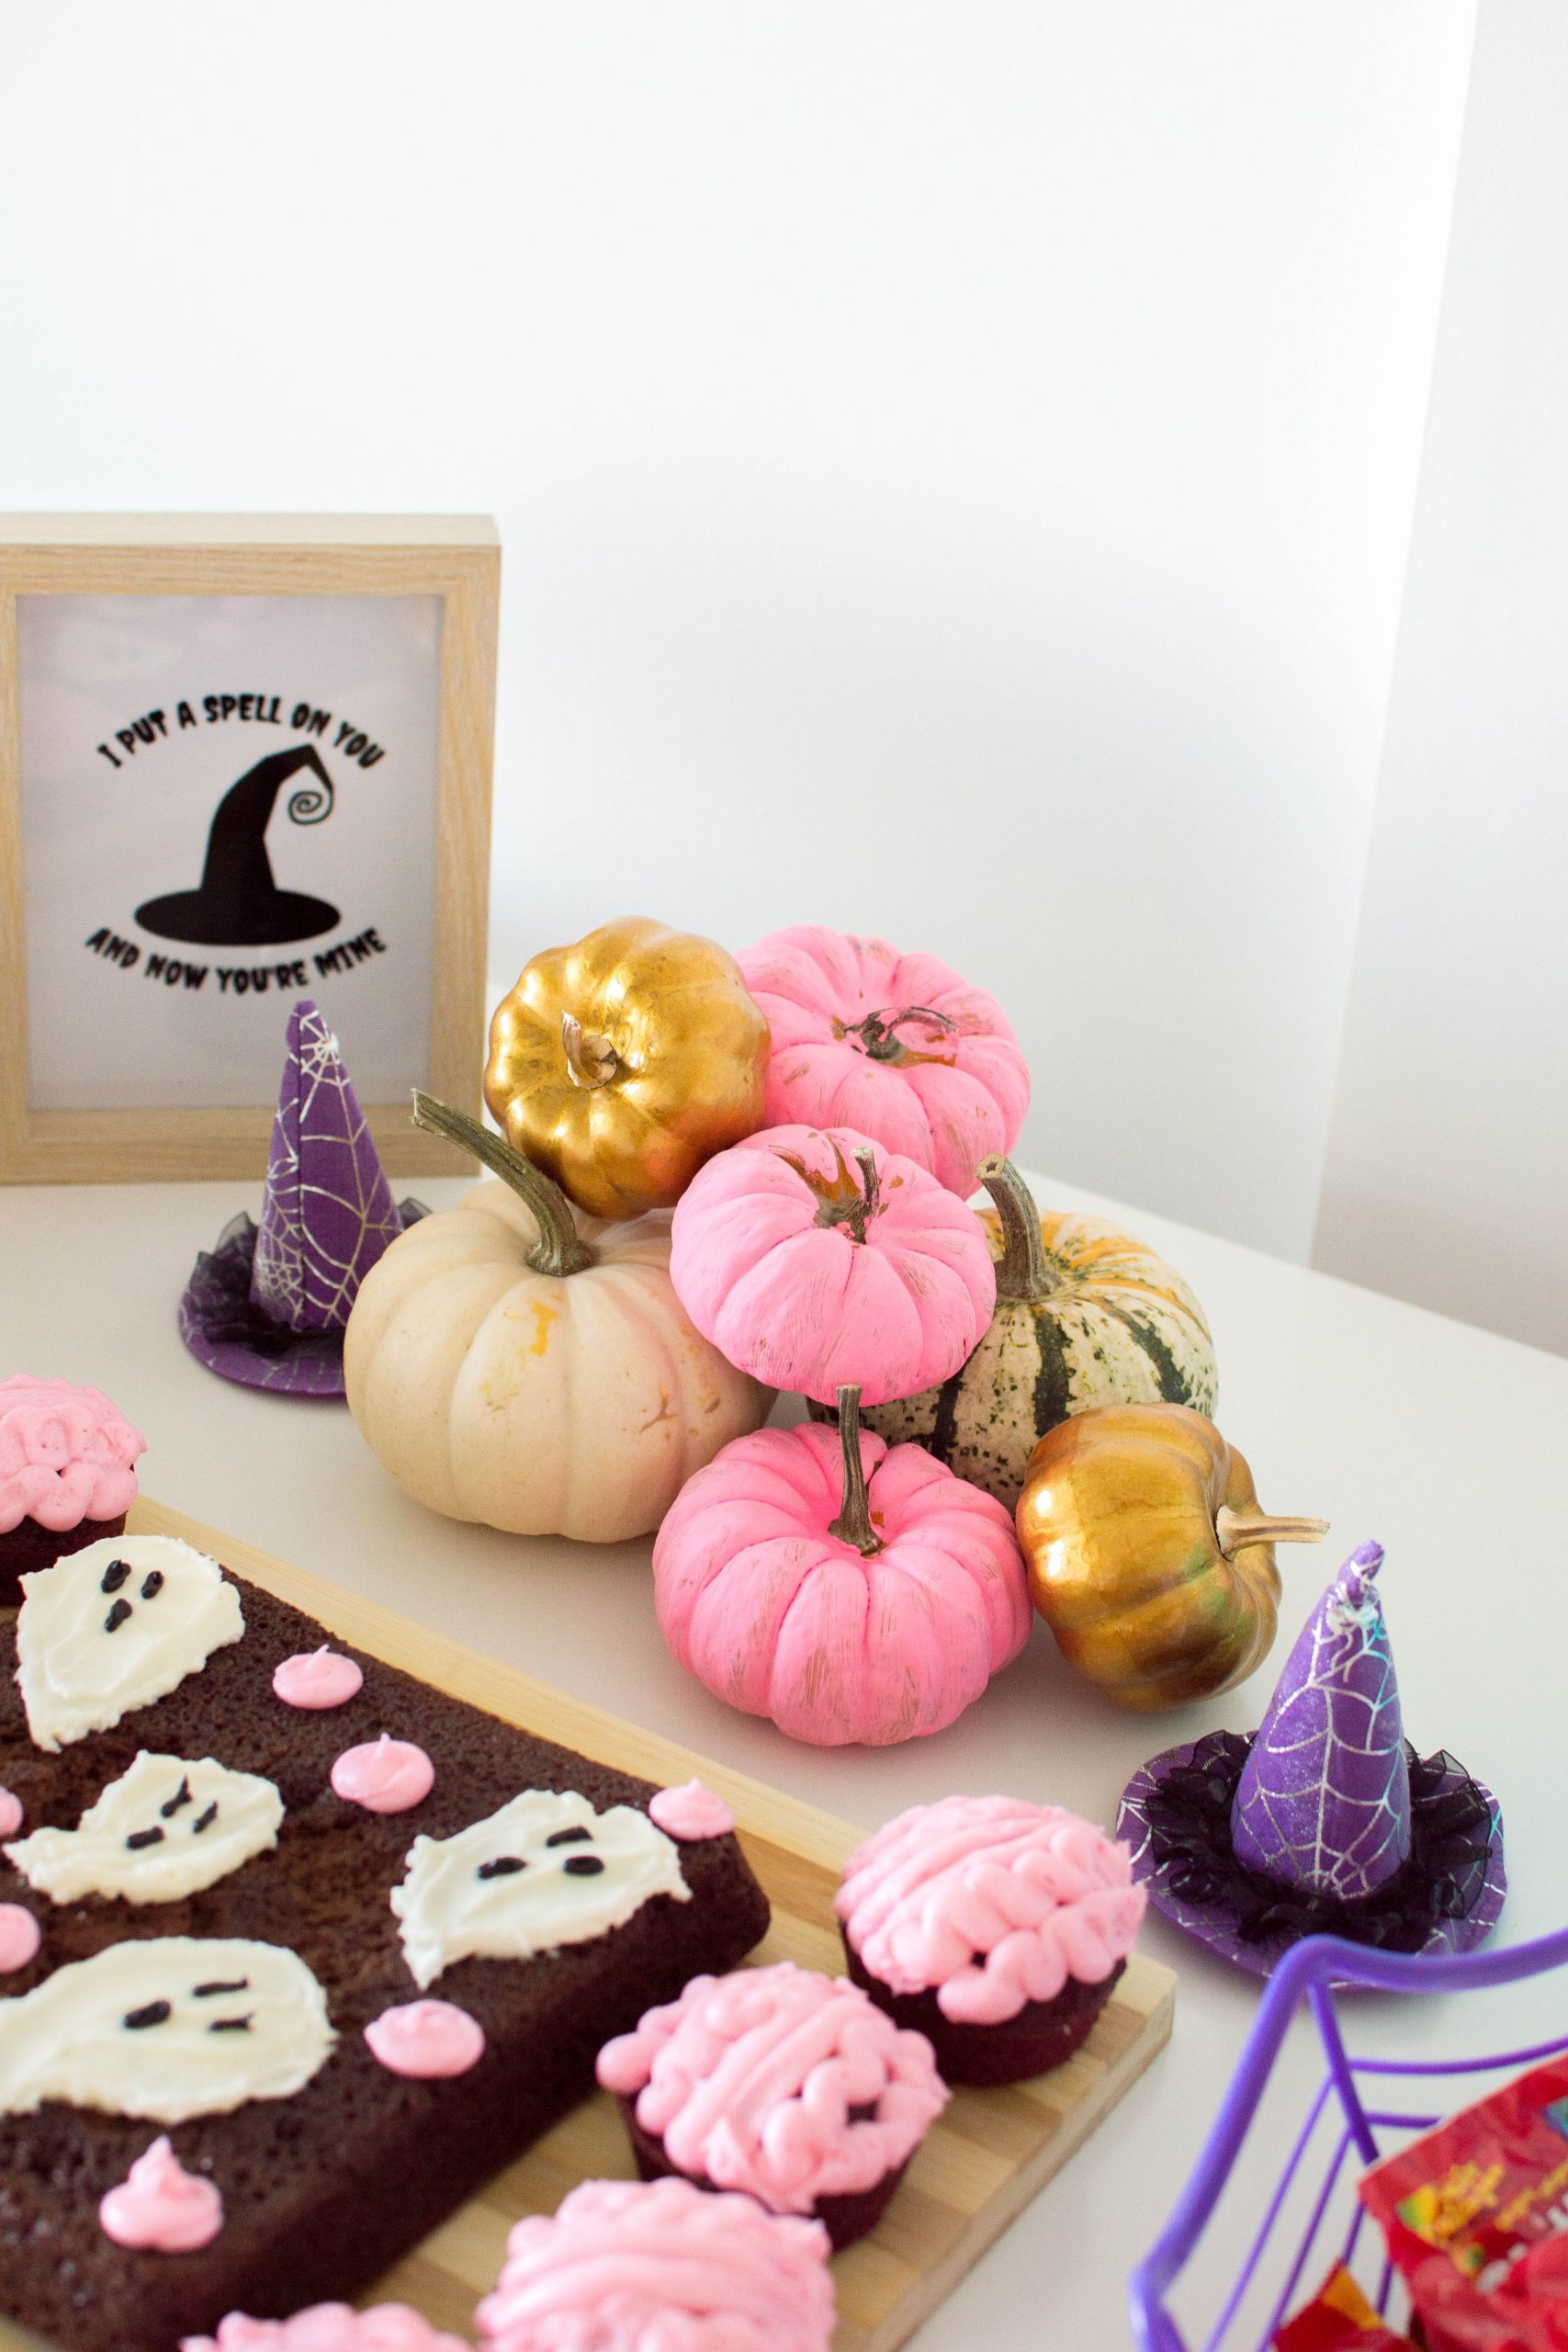 From pink desserts to pastel-coloured Halloween decorations, our little party came to life with good food, spooky music, and our best friends. Here are some pink Halloween ideas to incorporate into your next Halloween party.